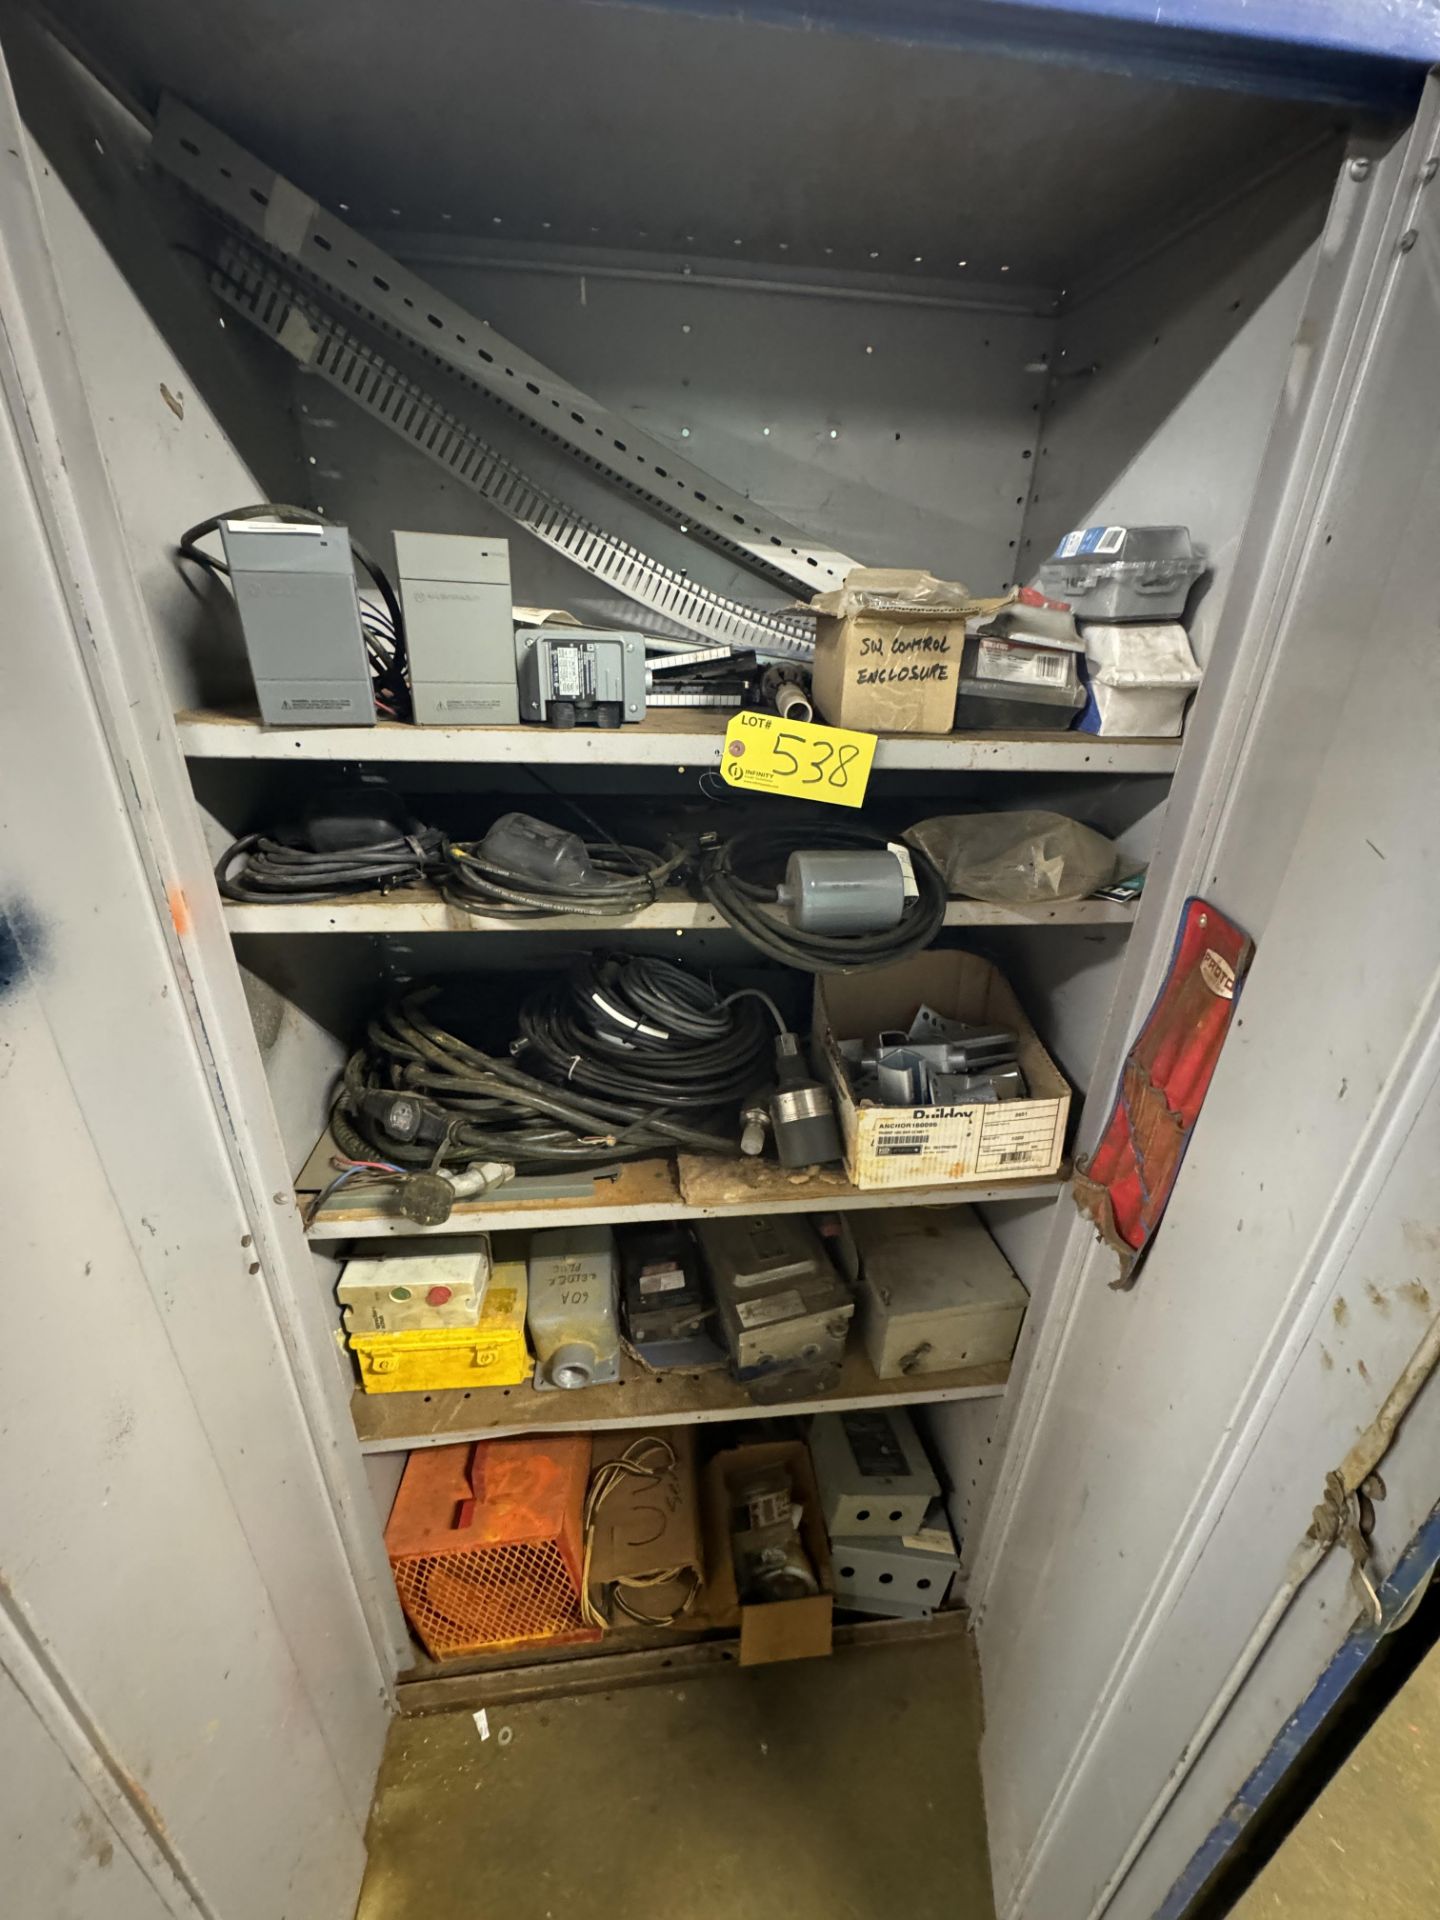 2-DOOR METAL CABINET W/ ELECTRICAL PARTS, CABLES, SWITCH BOXES, ETC.